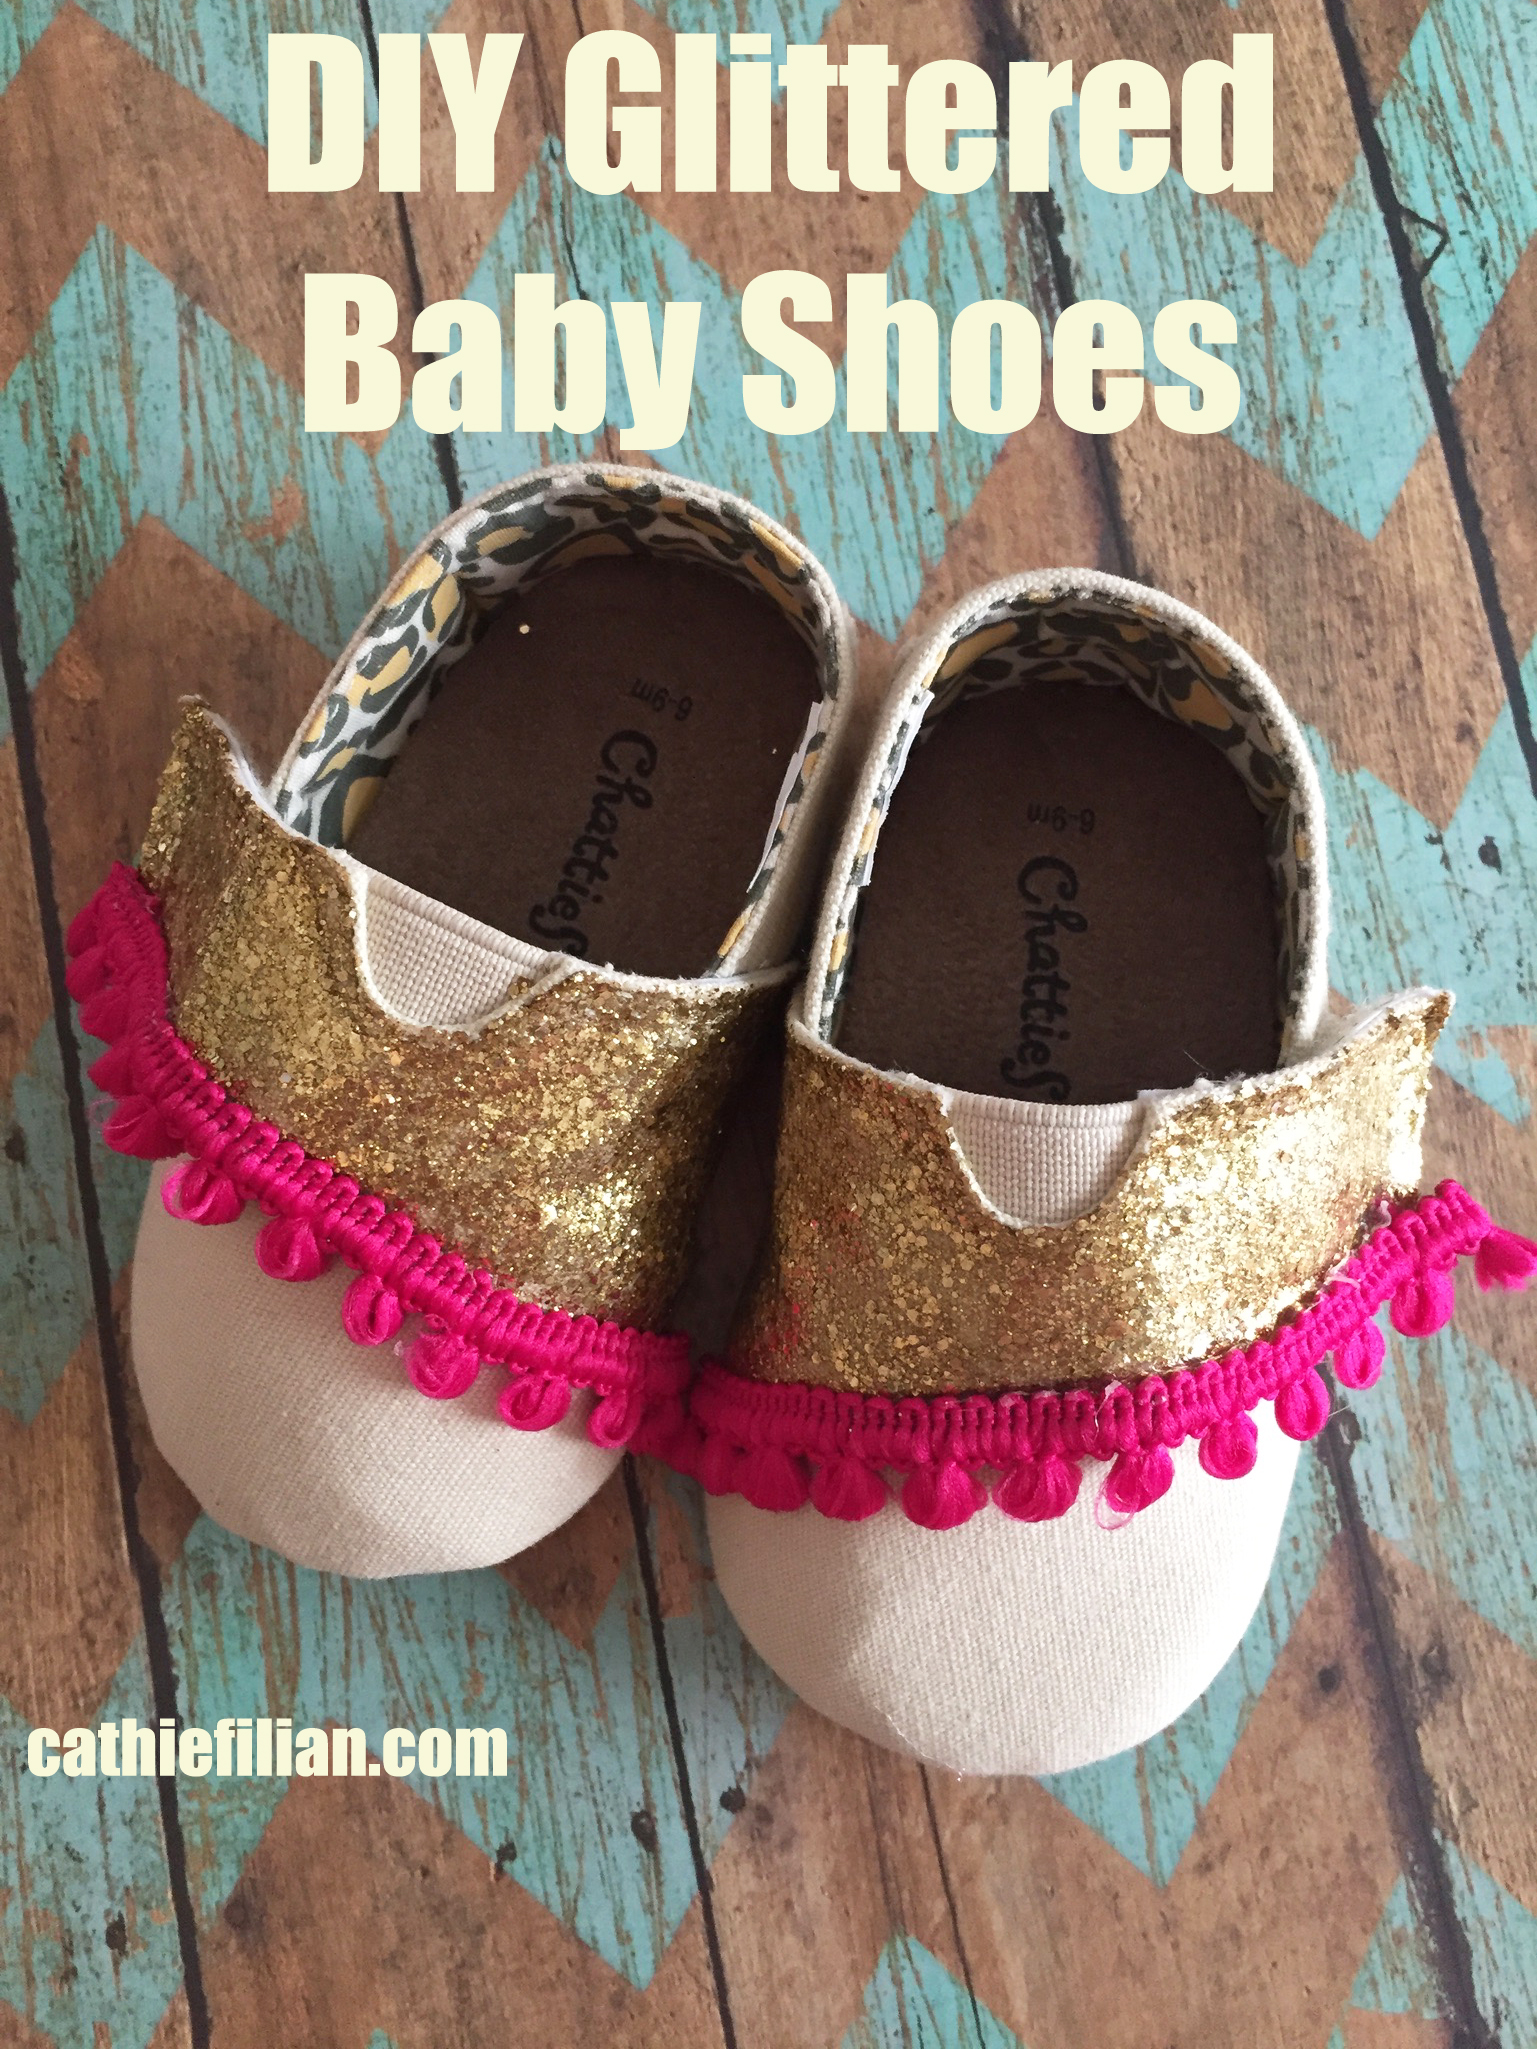 DIY How To Add Fabric to Sneakers with Mod Podge - CATHIE FILIAN's Handmade  Happy Hour